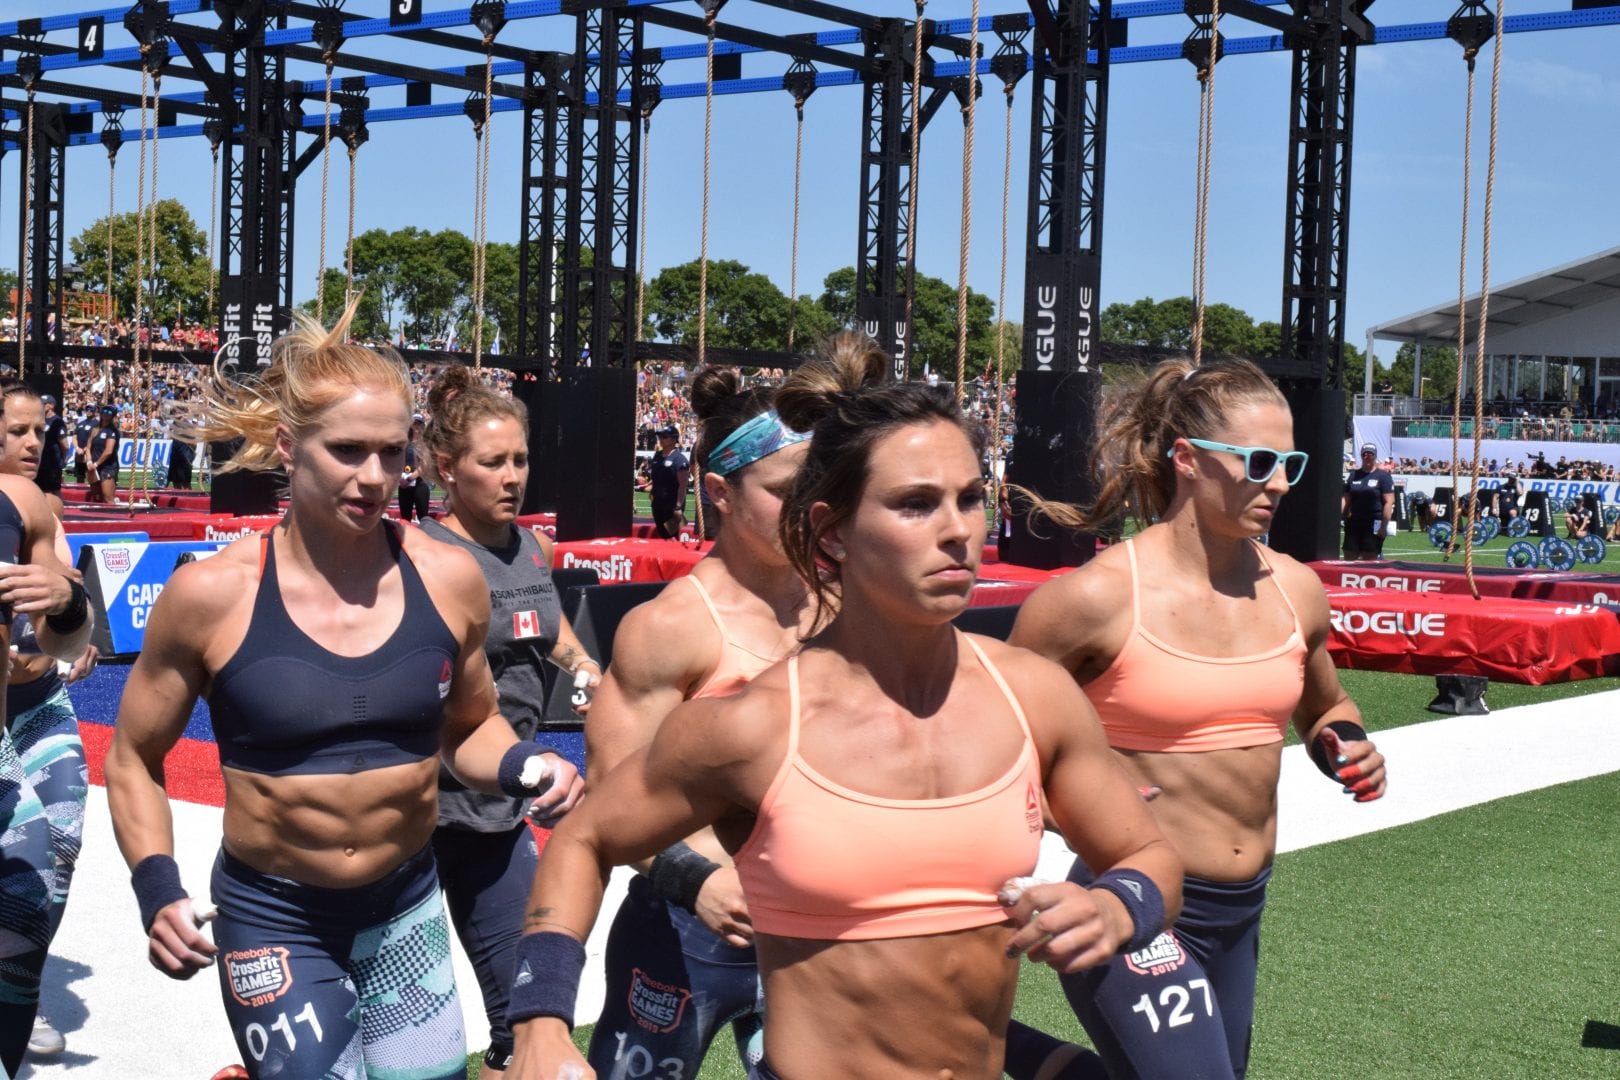 Karin Freyova and the pack take their first lap before completing legless rope climbs at the 2019 CrossFit Games